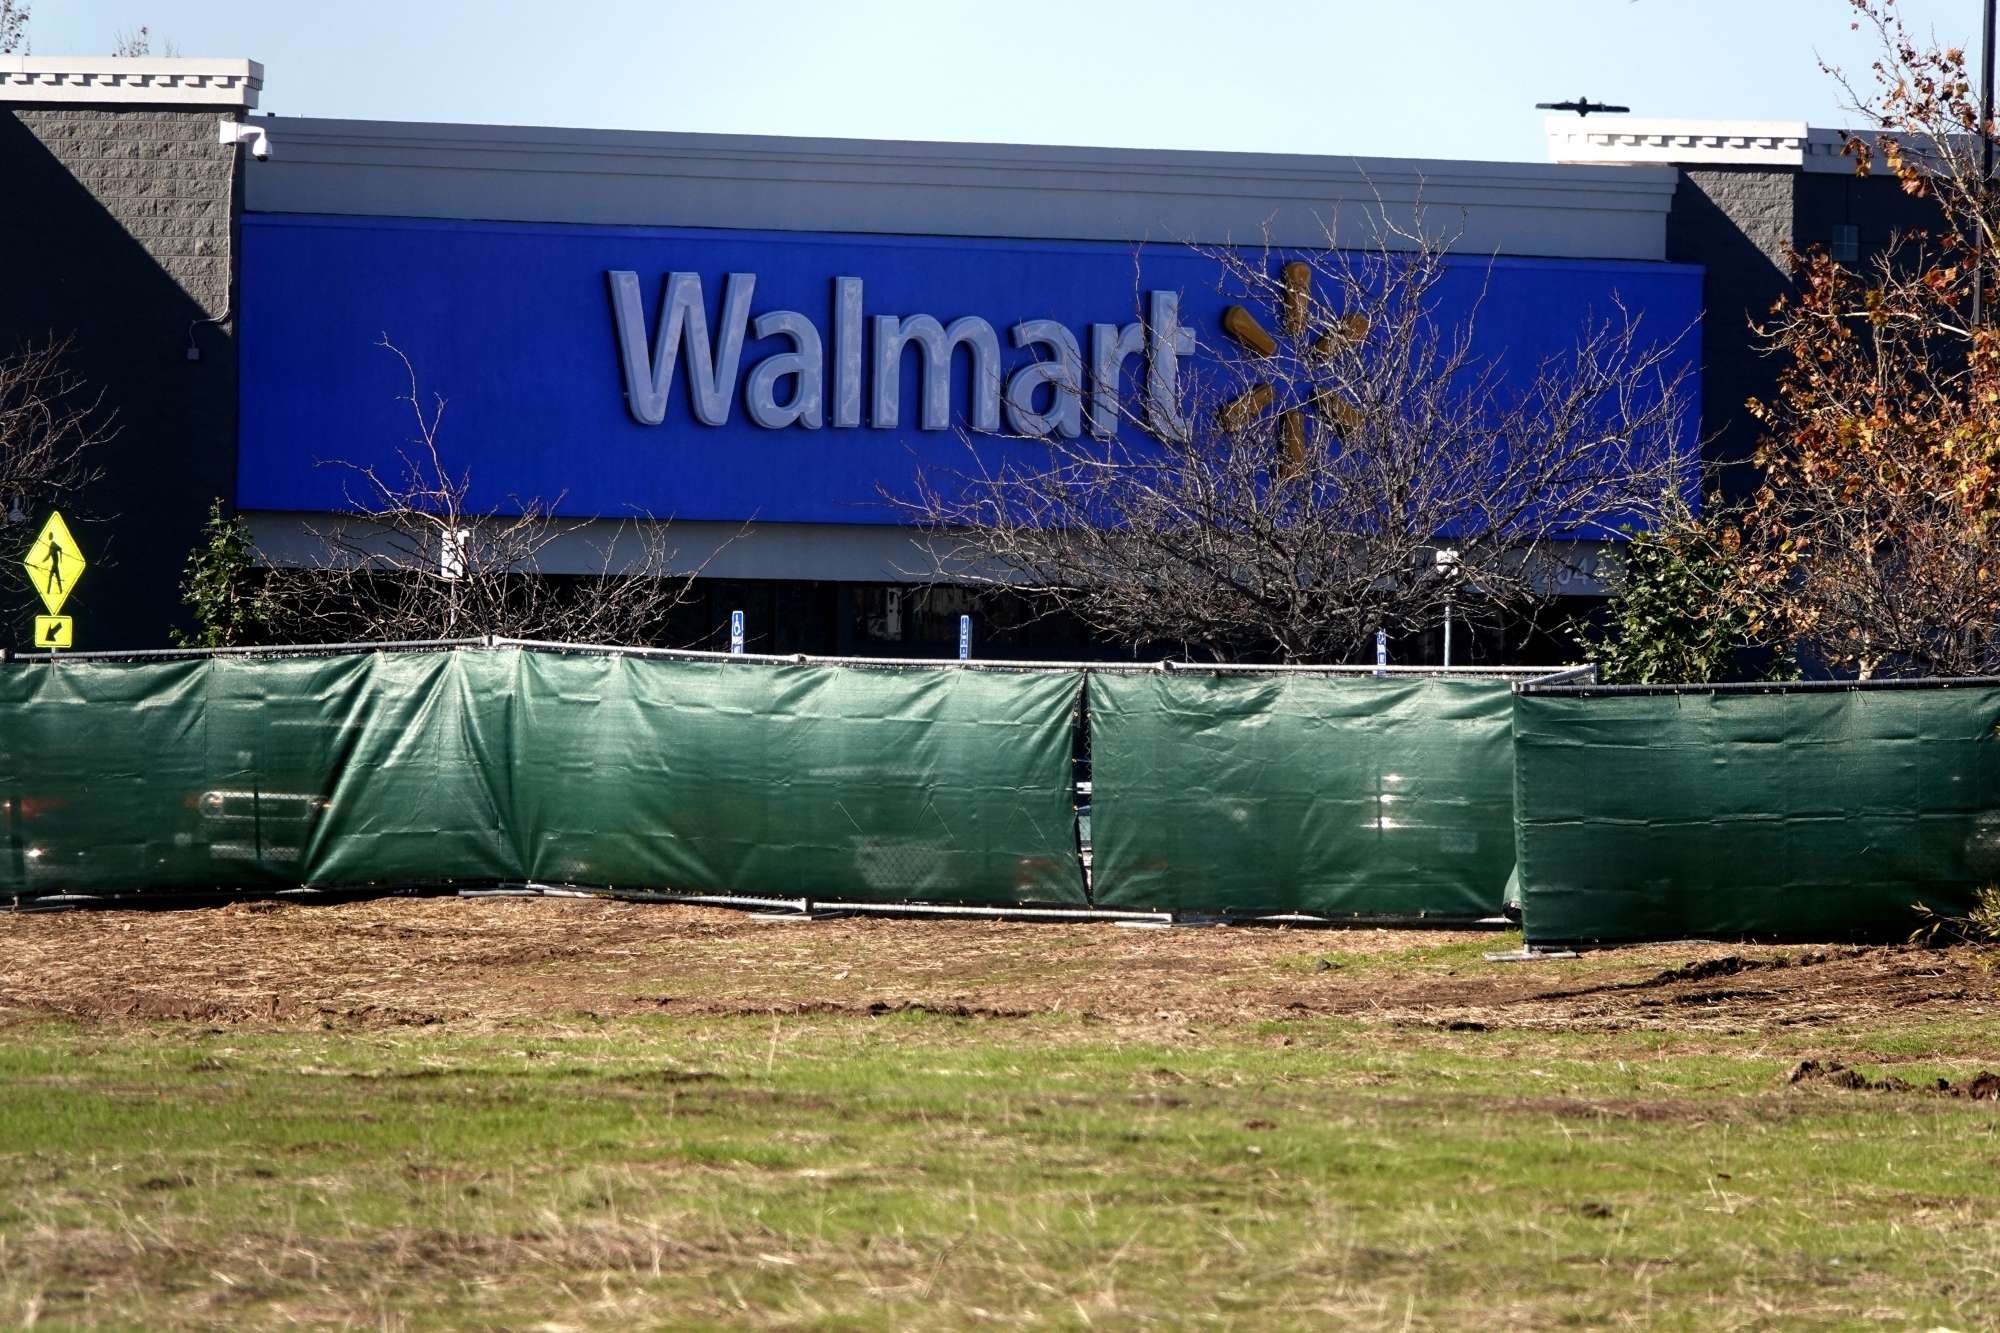 The curious case of Walmart India layoffs and whistleblower allegations reaches US headquarters